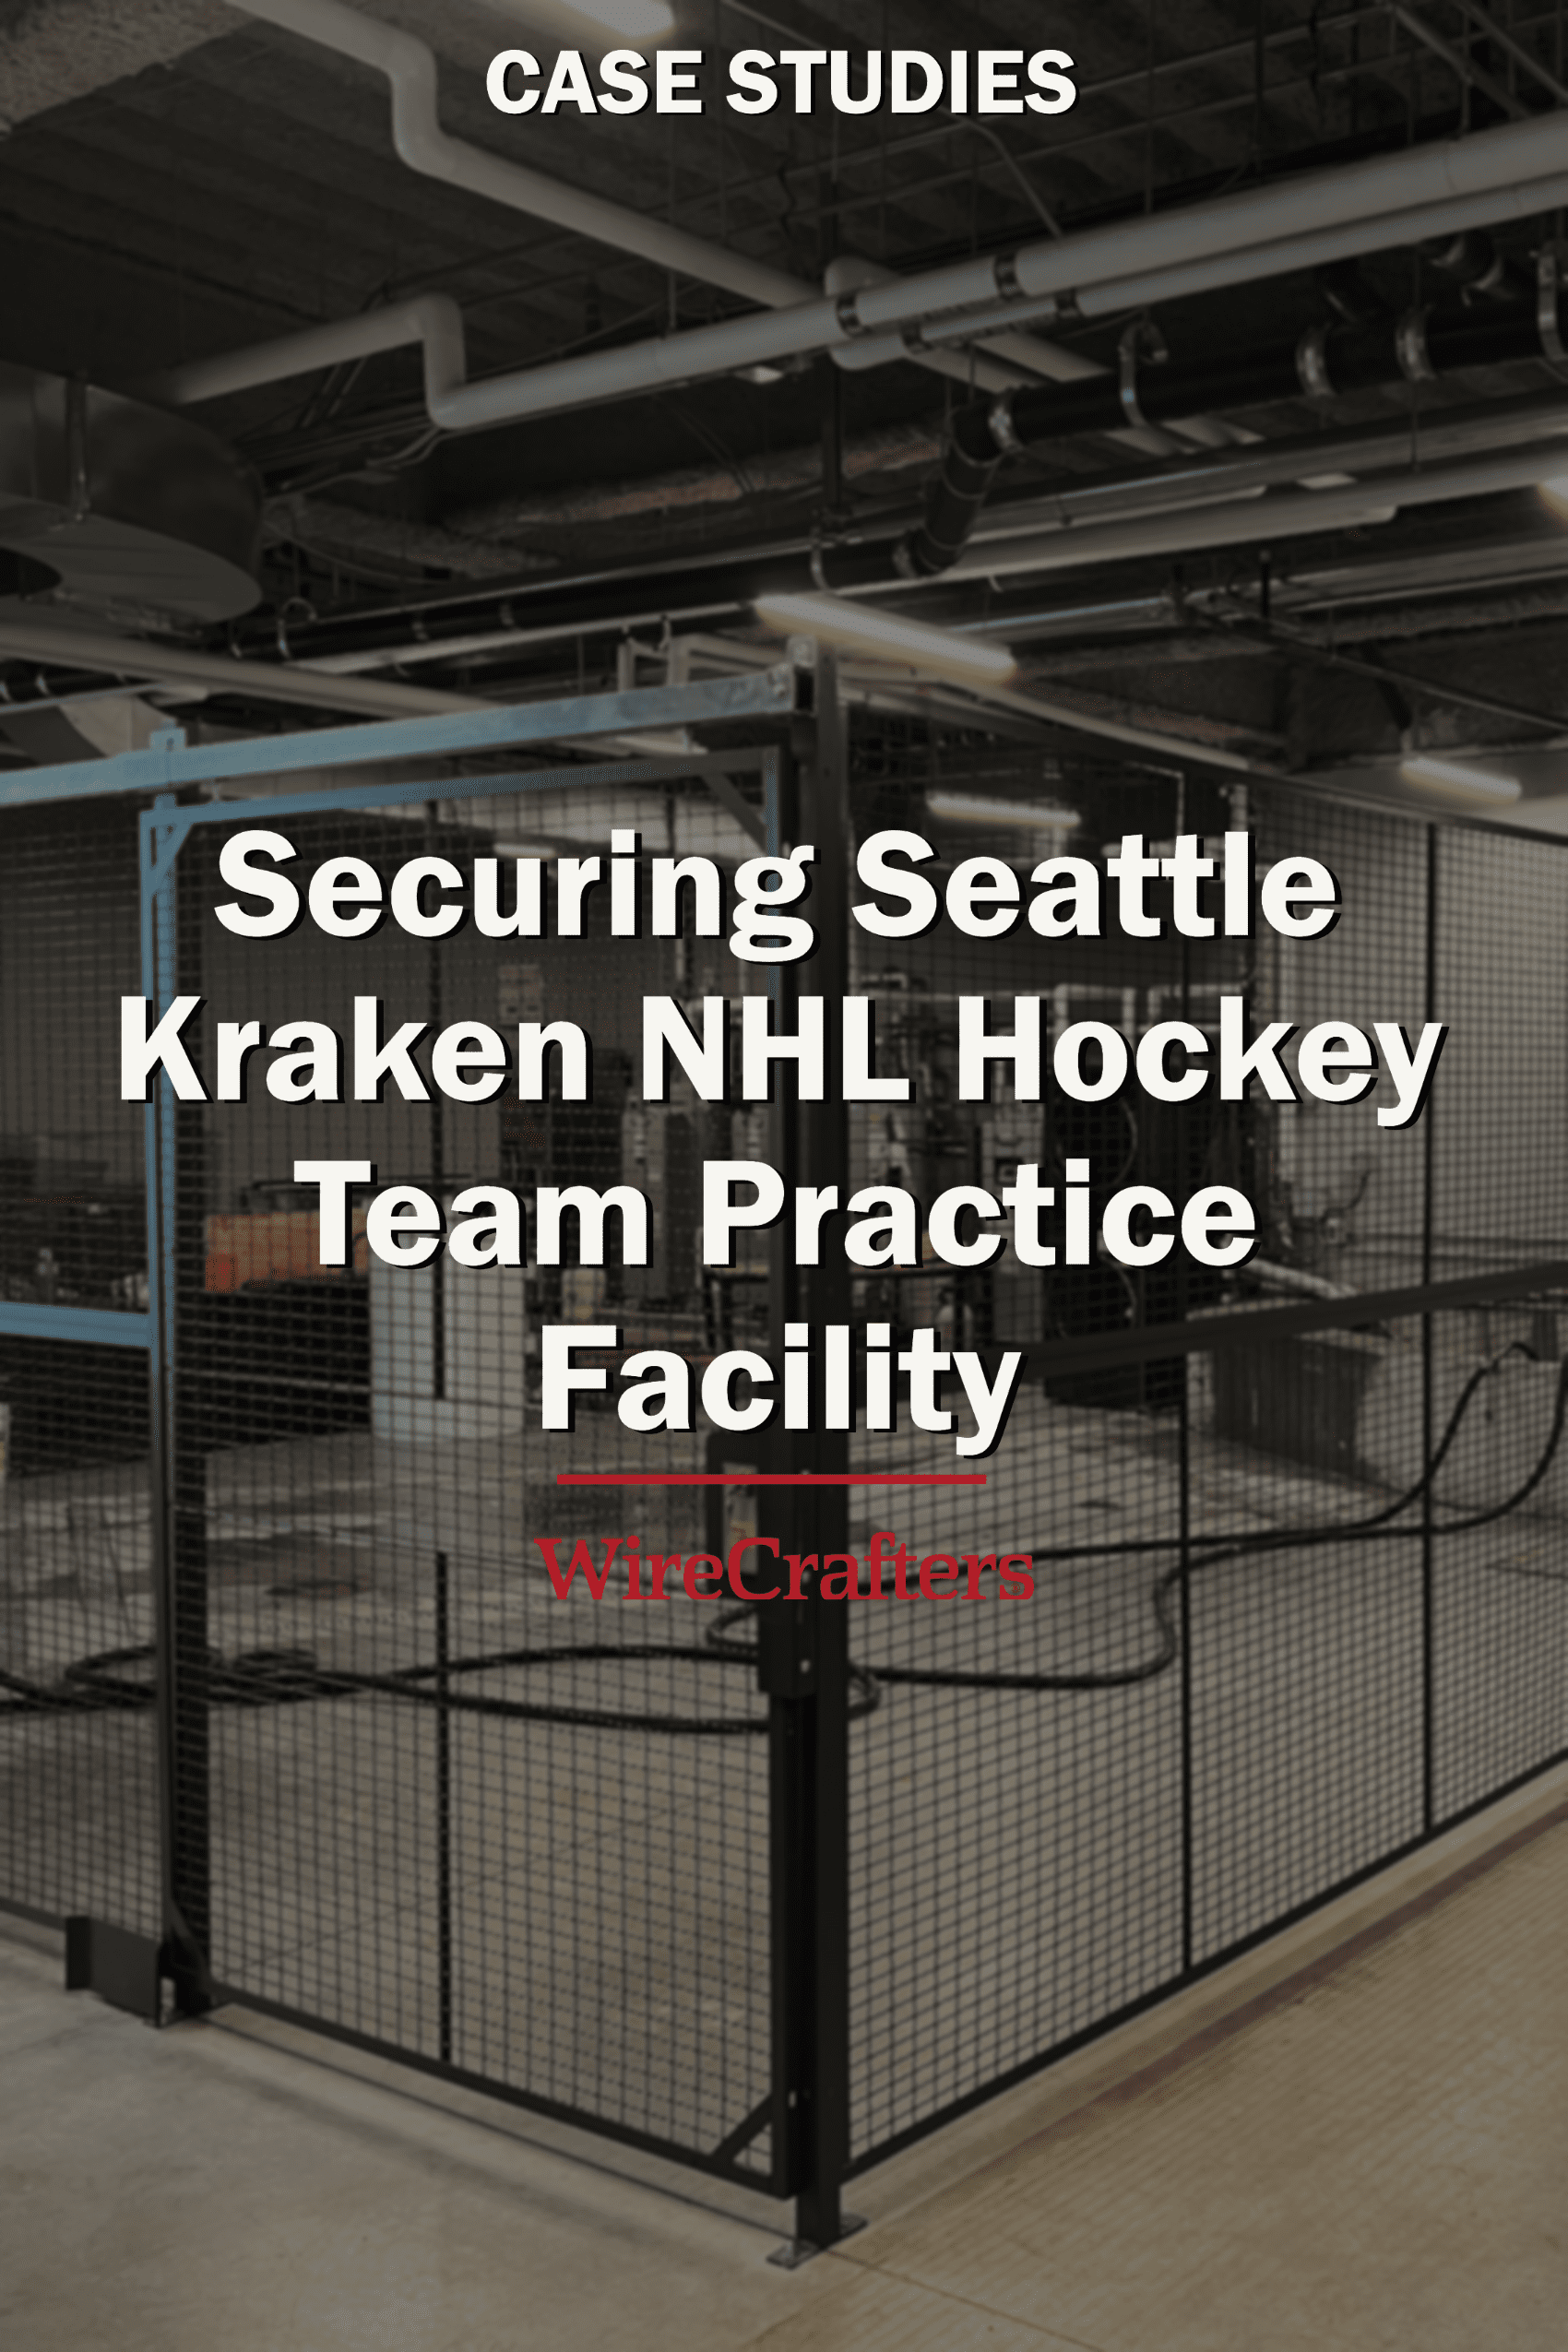 WireCrafters Secures Seattle Kraken NHL Hockey Team Practice Facility